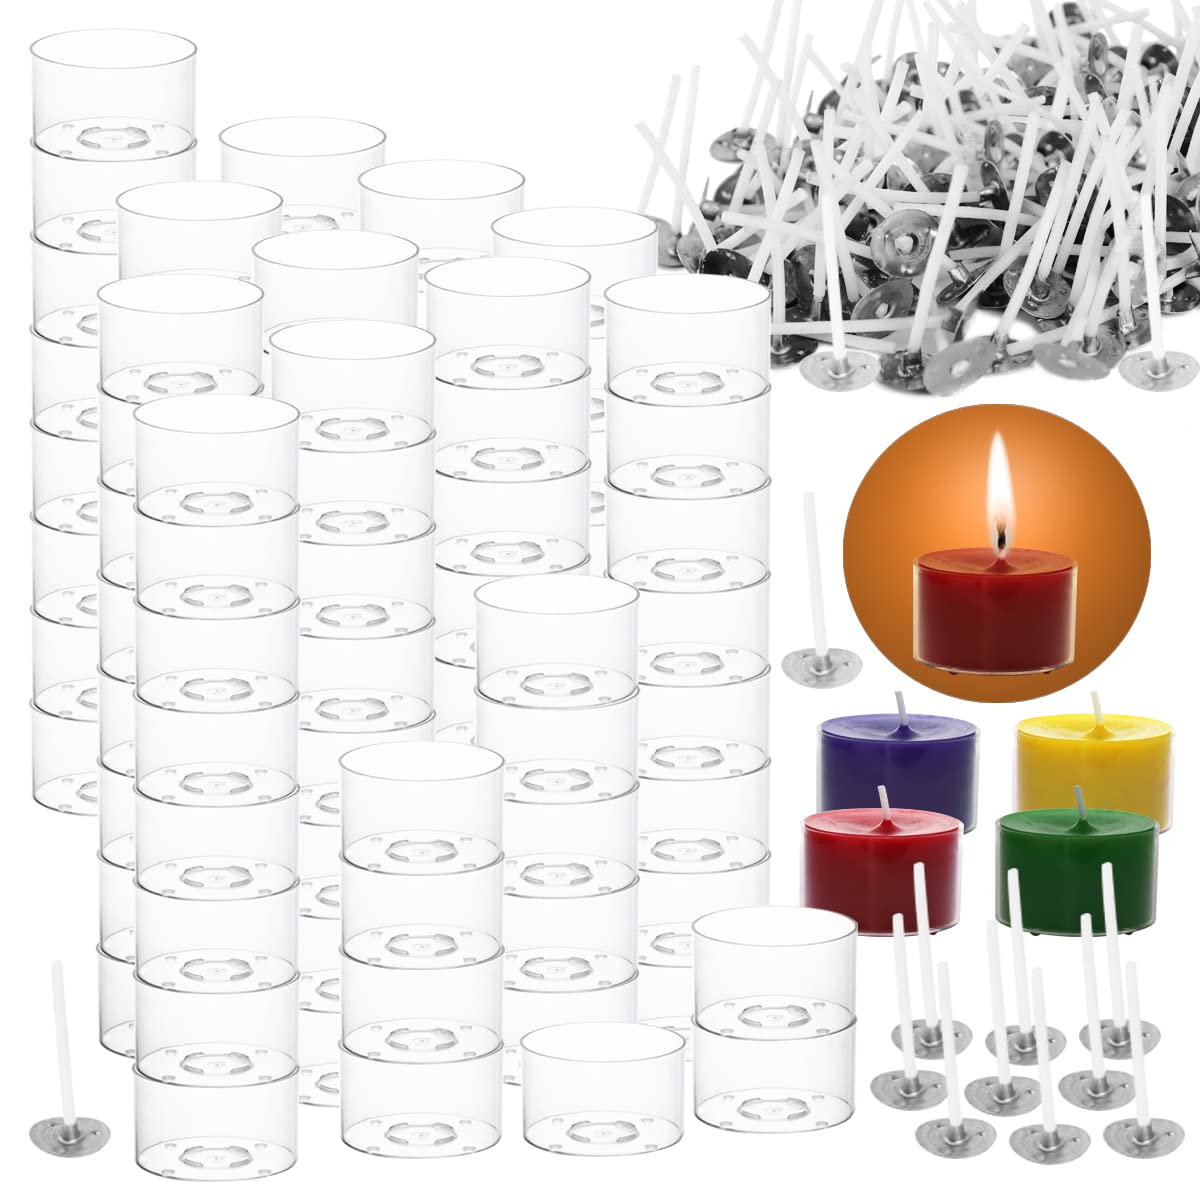 PEILIN 100 pcs Plastic Clear Tealight Cups Holders Candle Wax Tins Jars  Cases with 100pcs 40